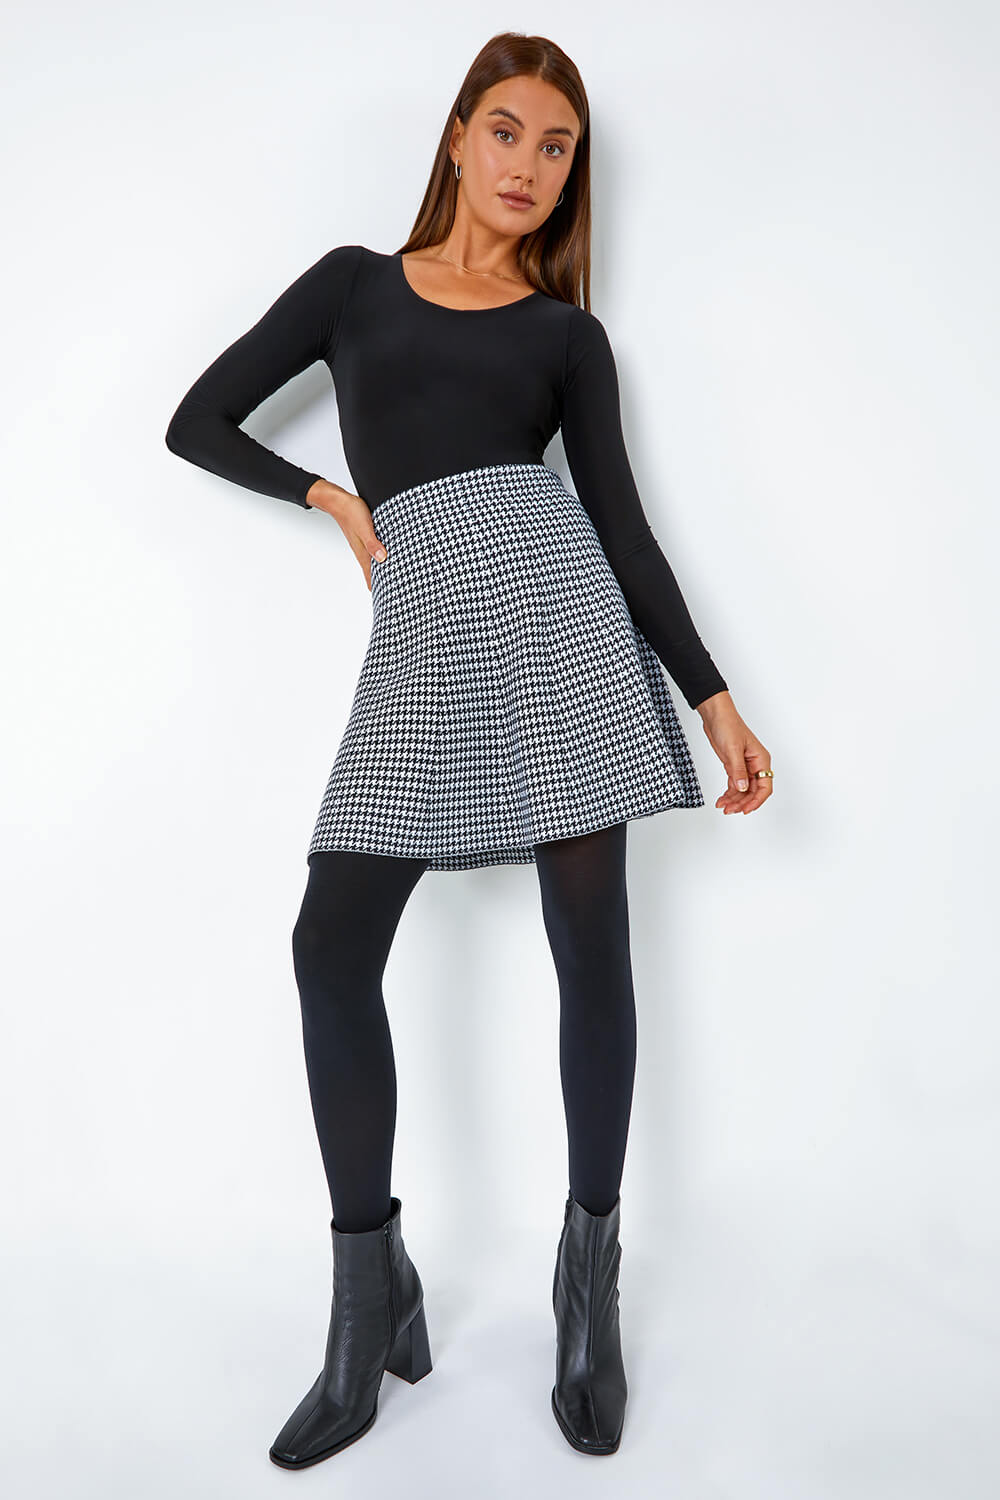 Black Dogstooth Knitted A-Line Mini Skirt, Image 2 of 5